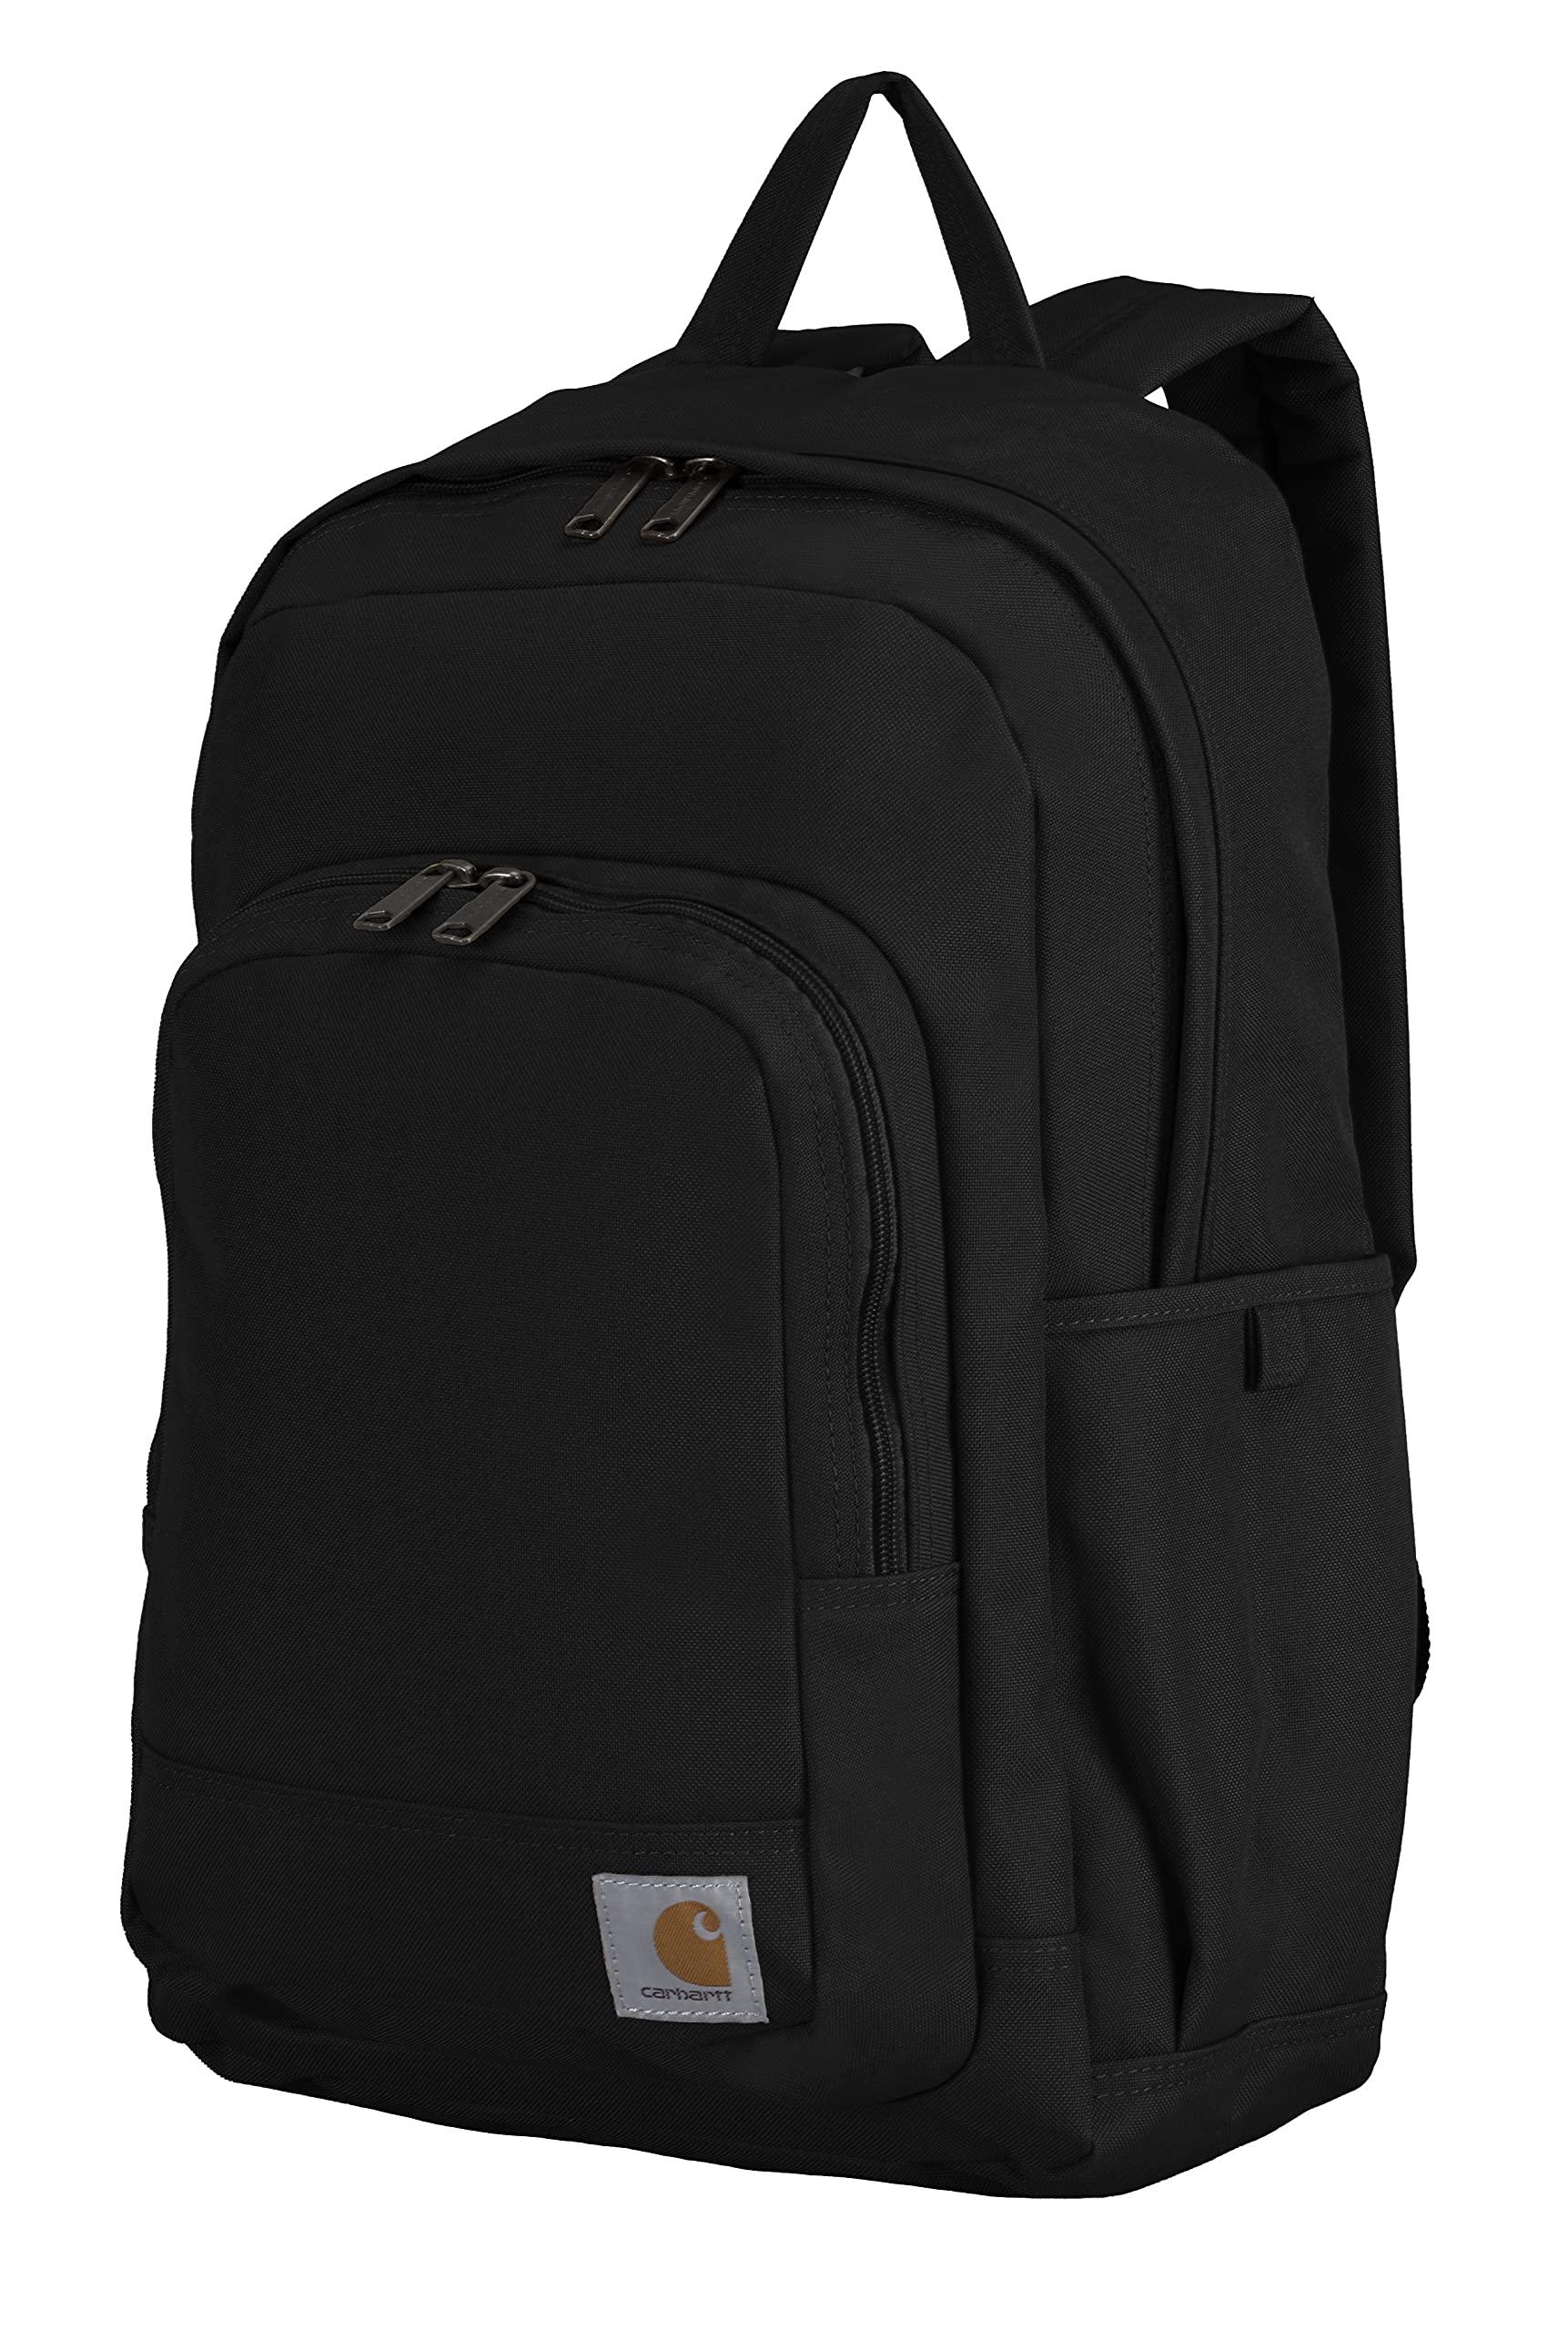 Carhartt Synthetic Essentials Backpack With 17-inch Laptop Sleeve For  Travel in Black | Lyst